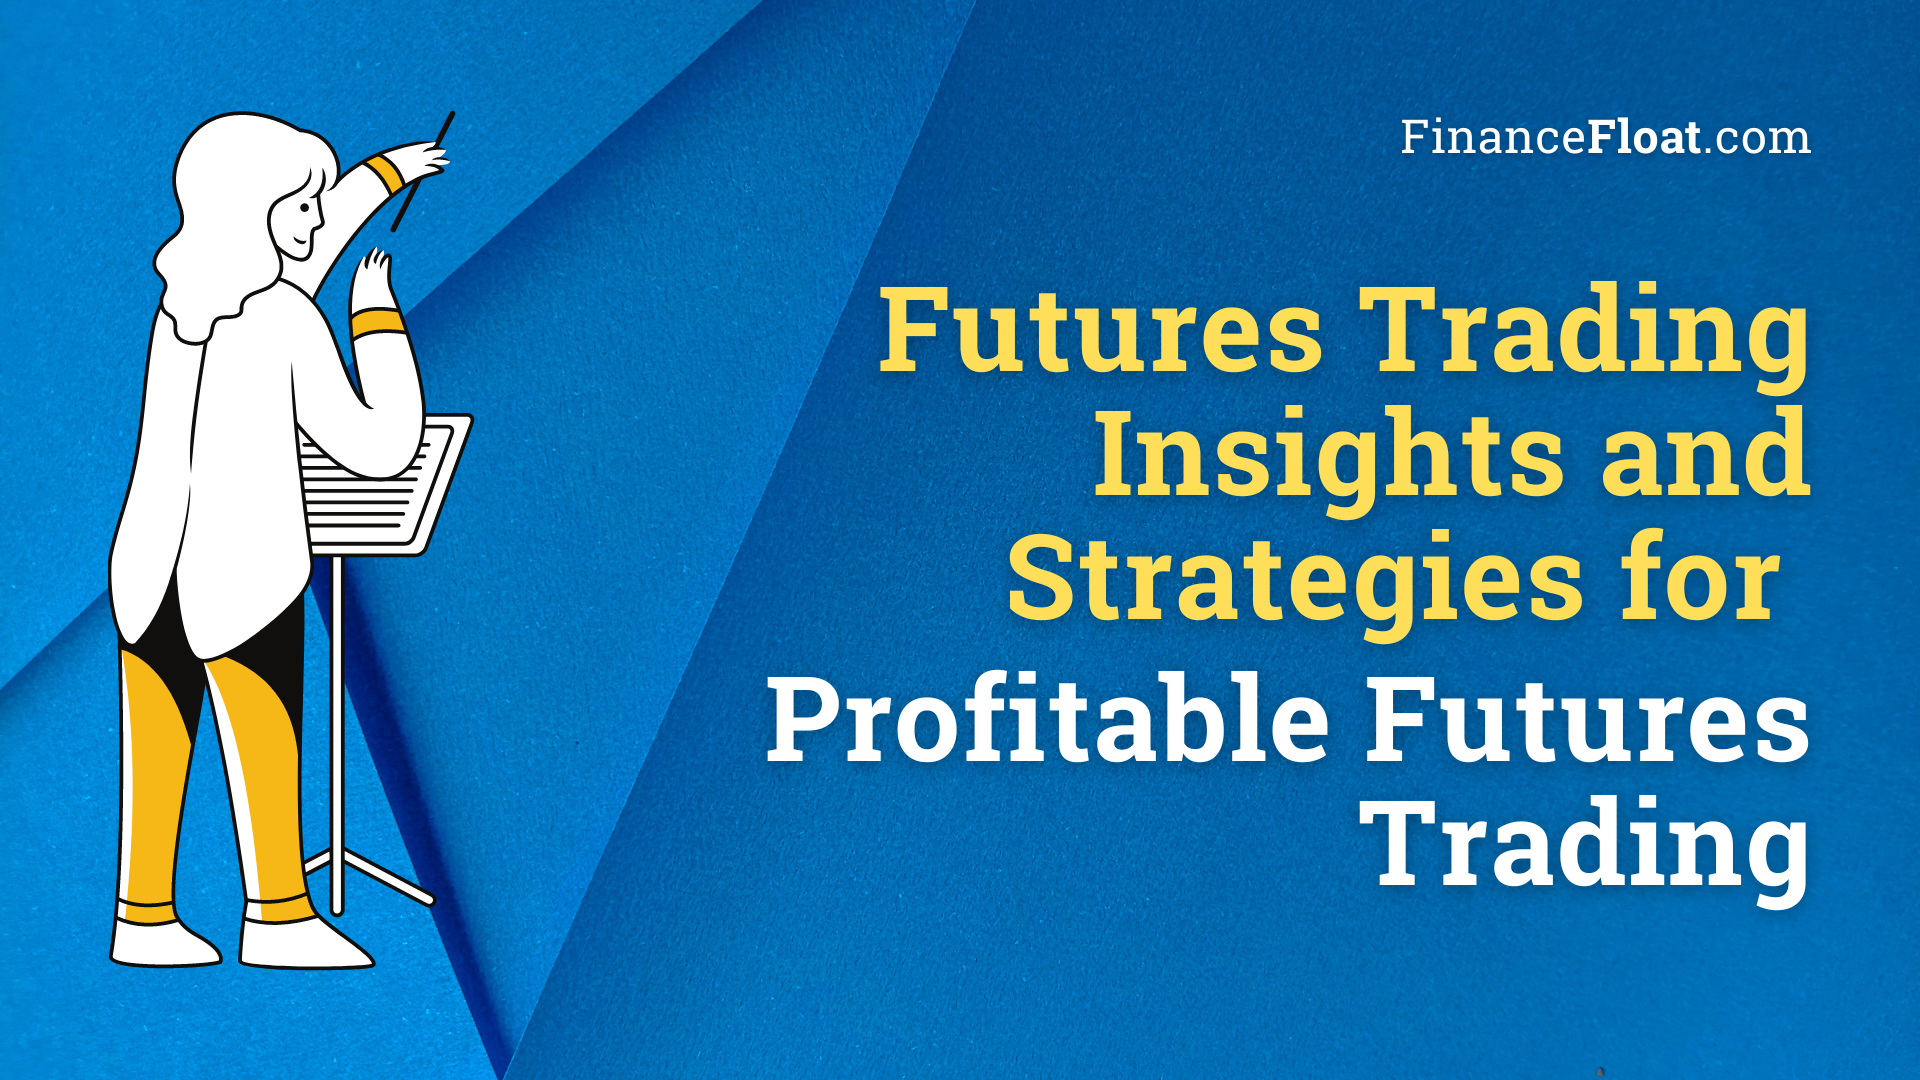 Futures Trading Insights and Strategies for Profitable Futures Trading.